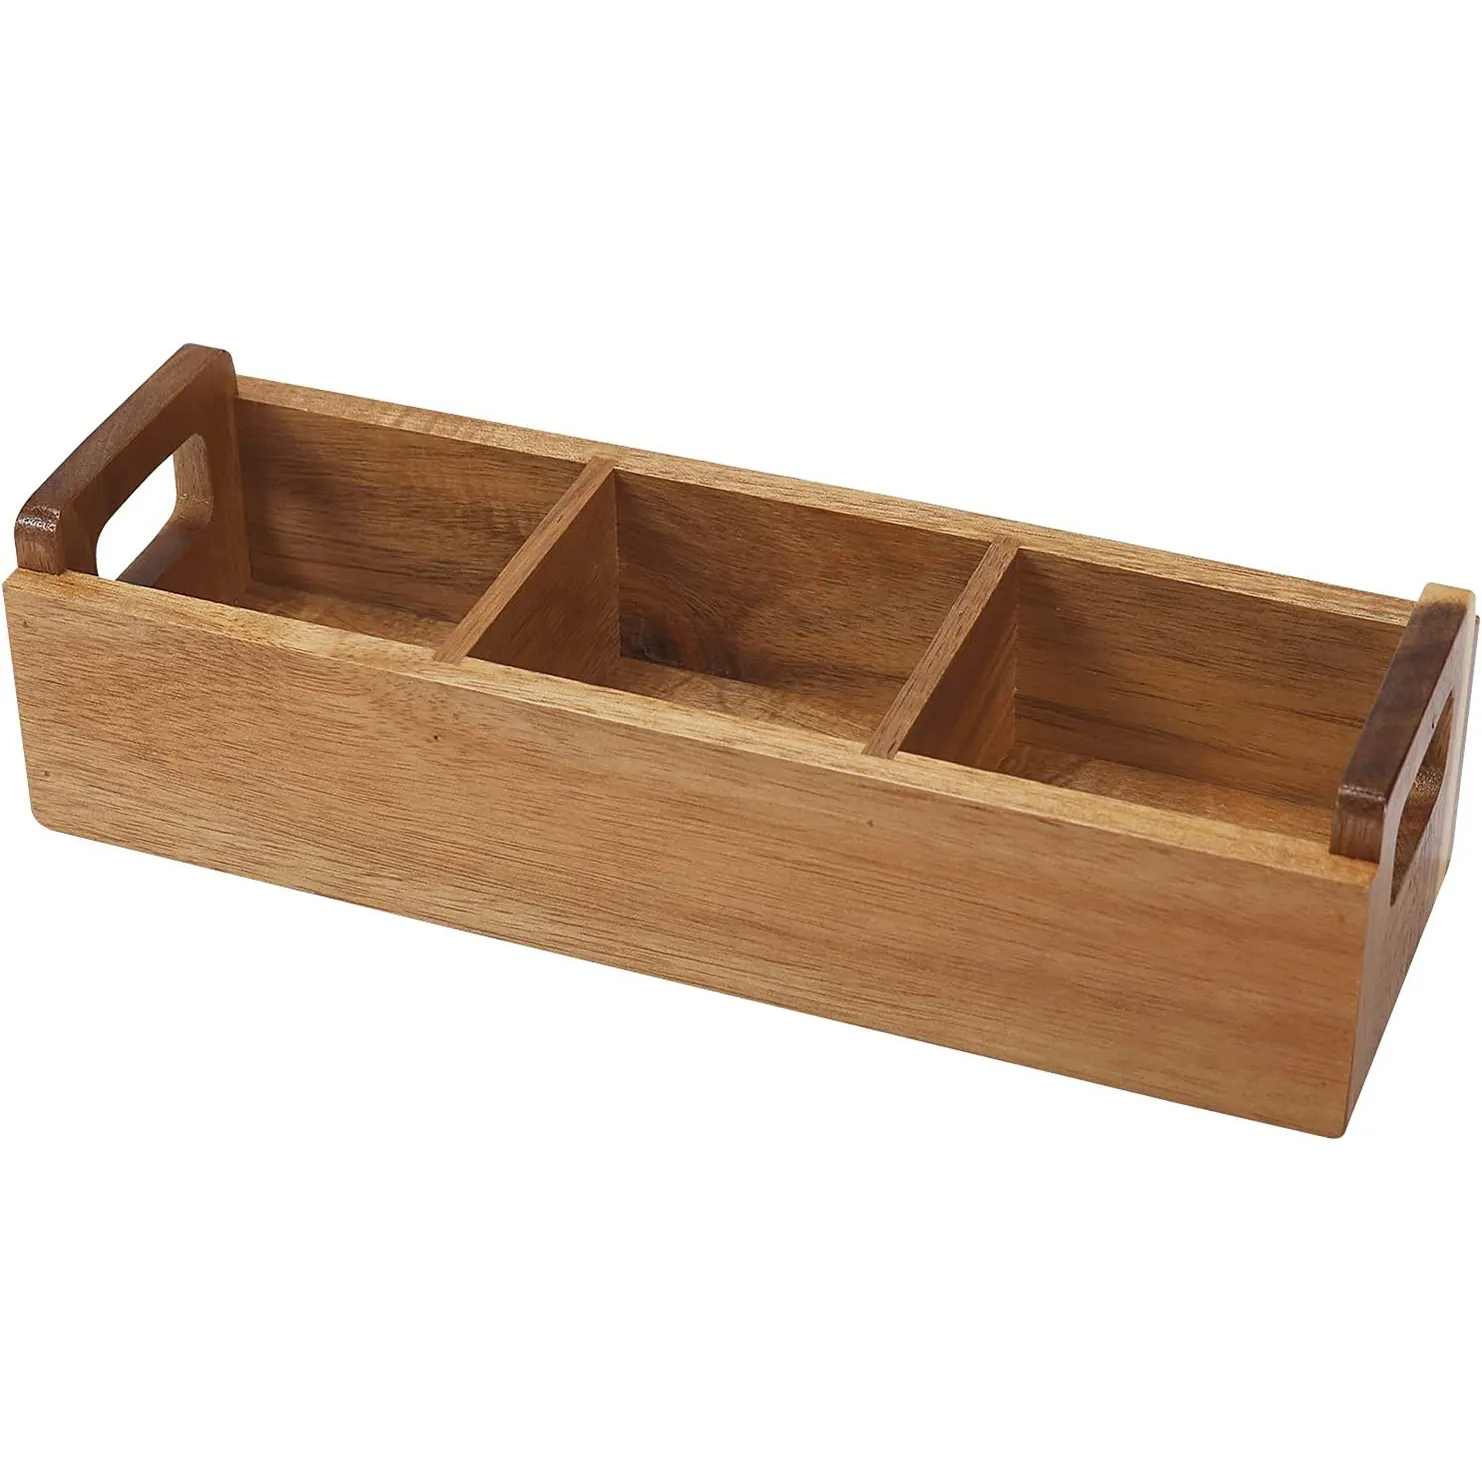 Small Wooden Tea Bag Box 3 Compartments Acacia Wood Tea Bag Chest with Handle  Mini Divided Storage Container for HOME